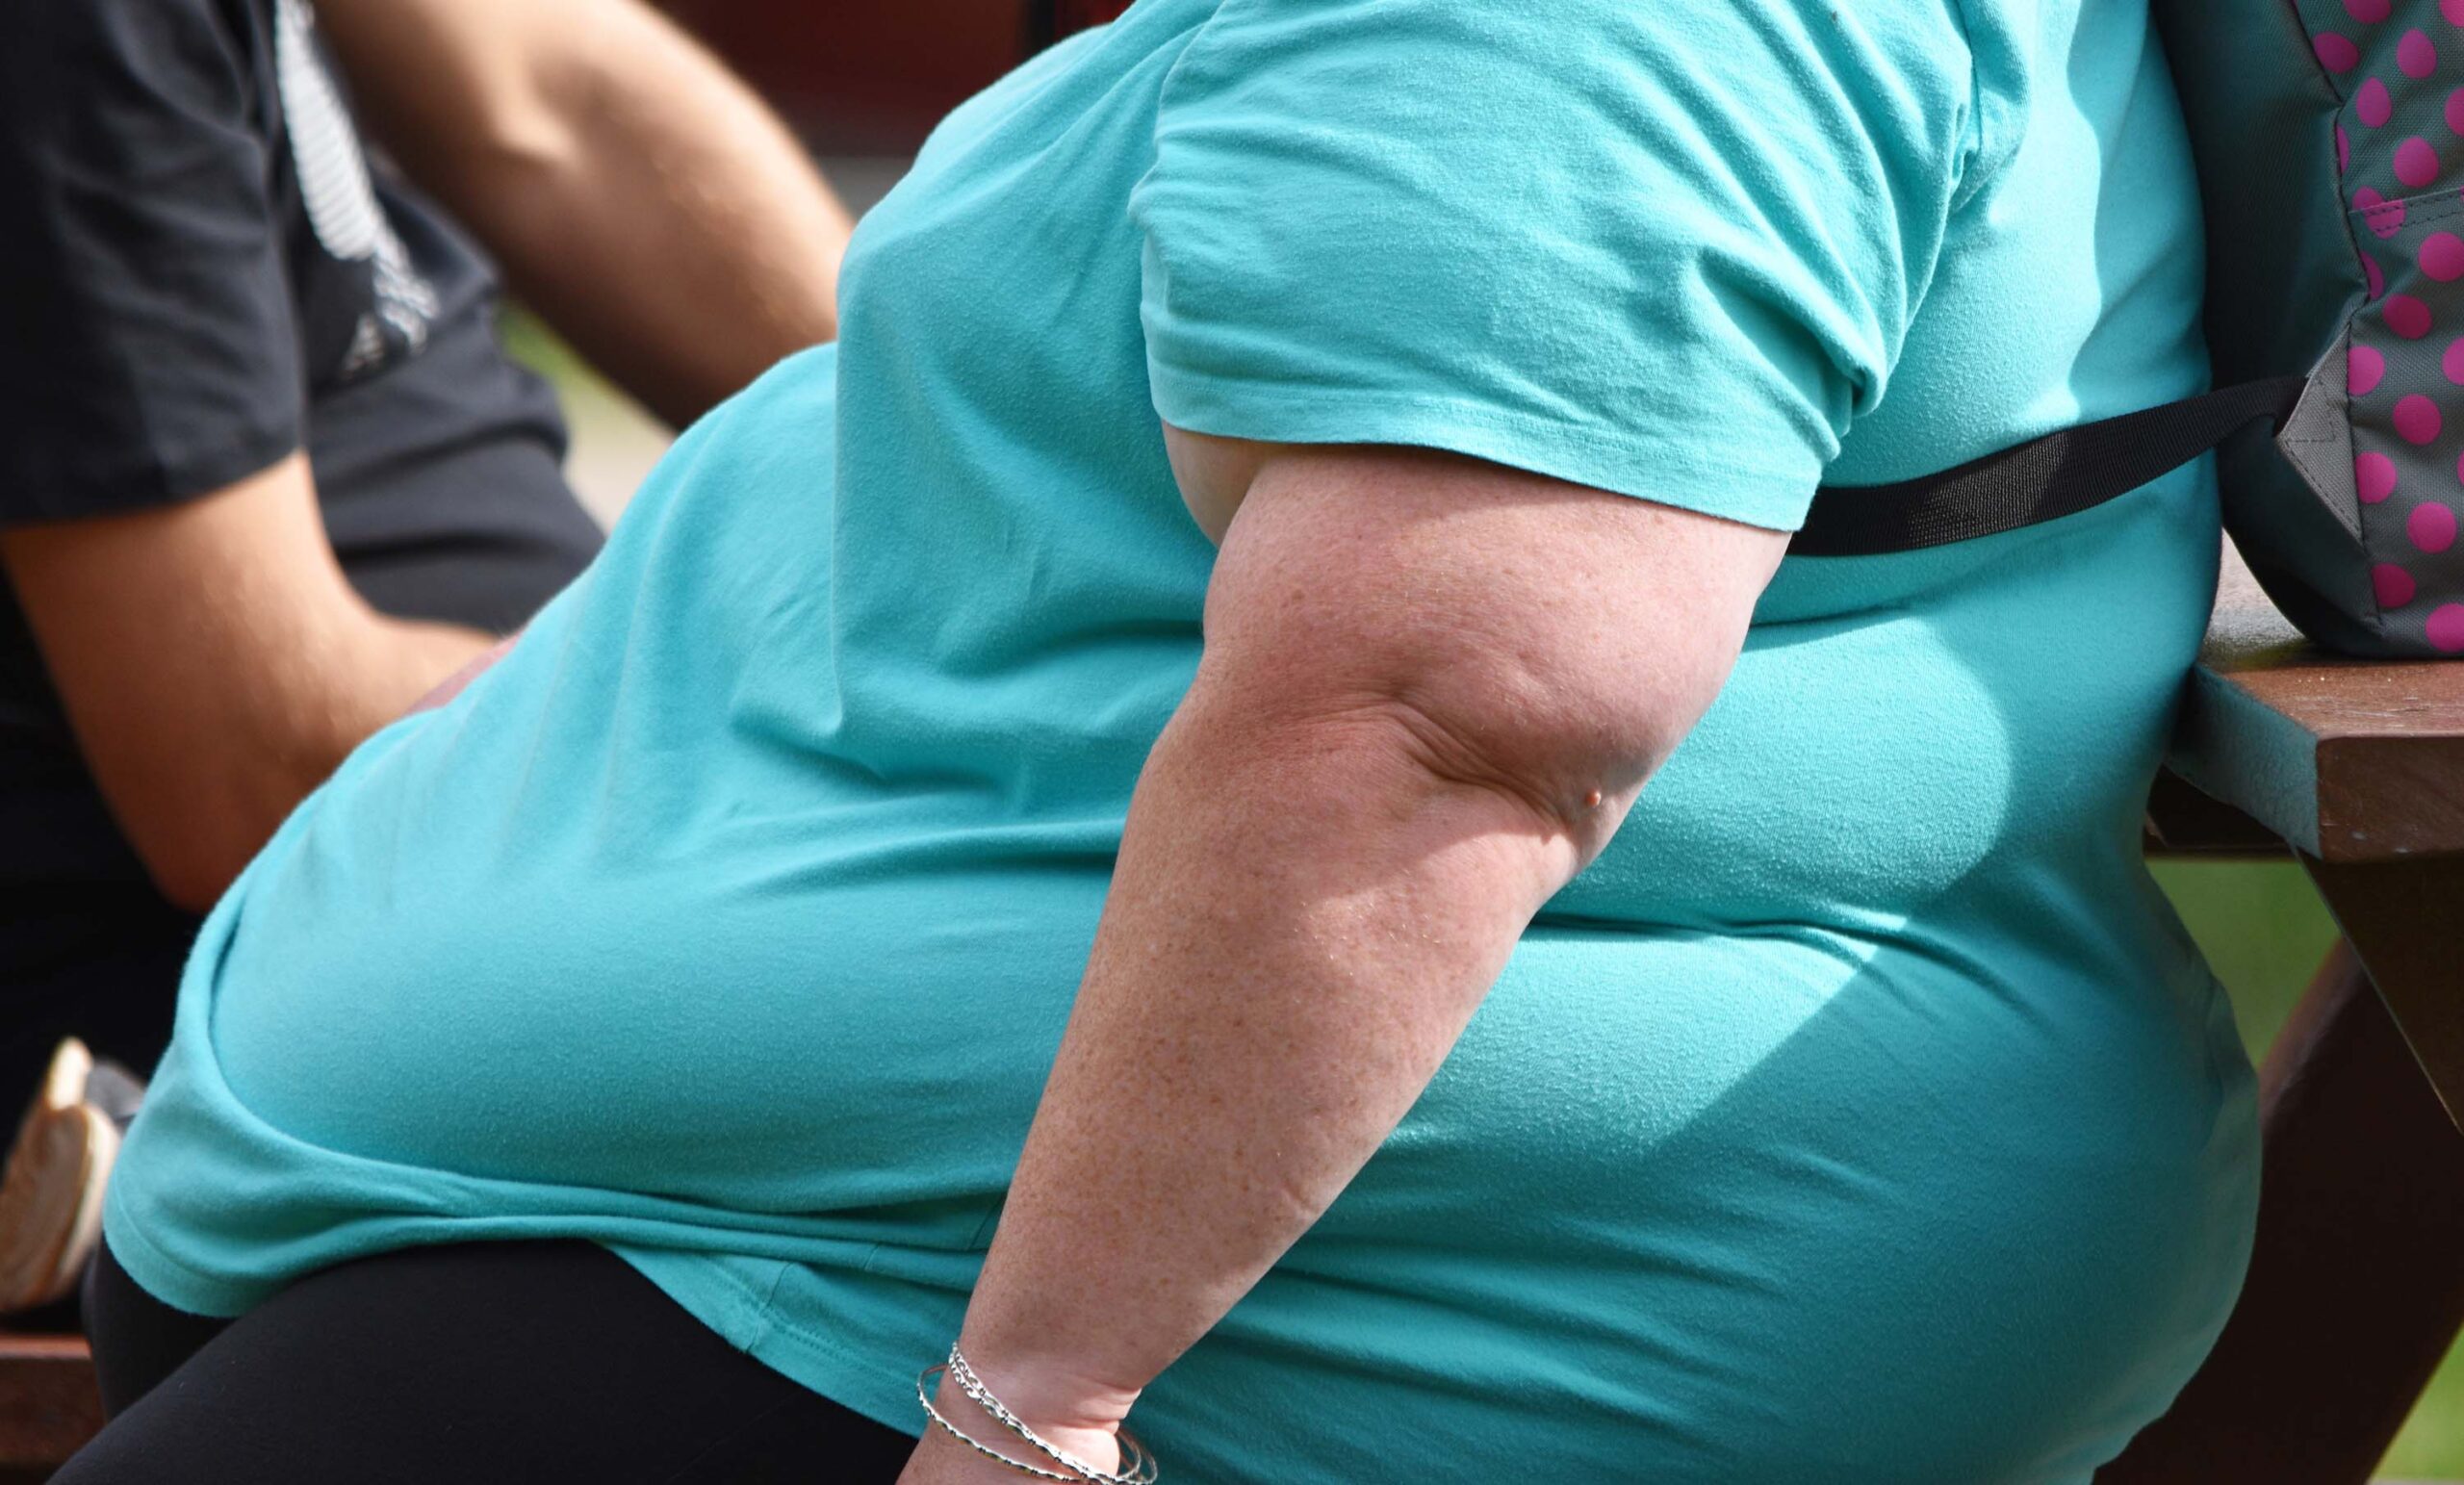 What Is The Main Cause Of Obesity?